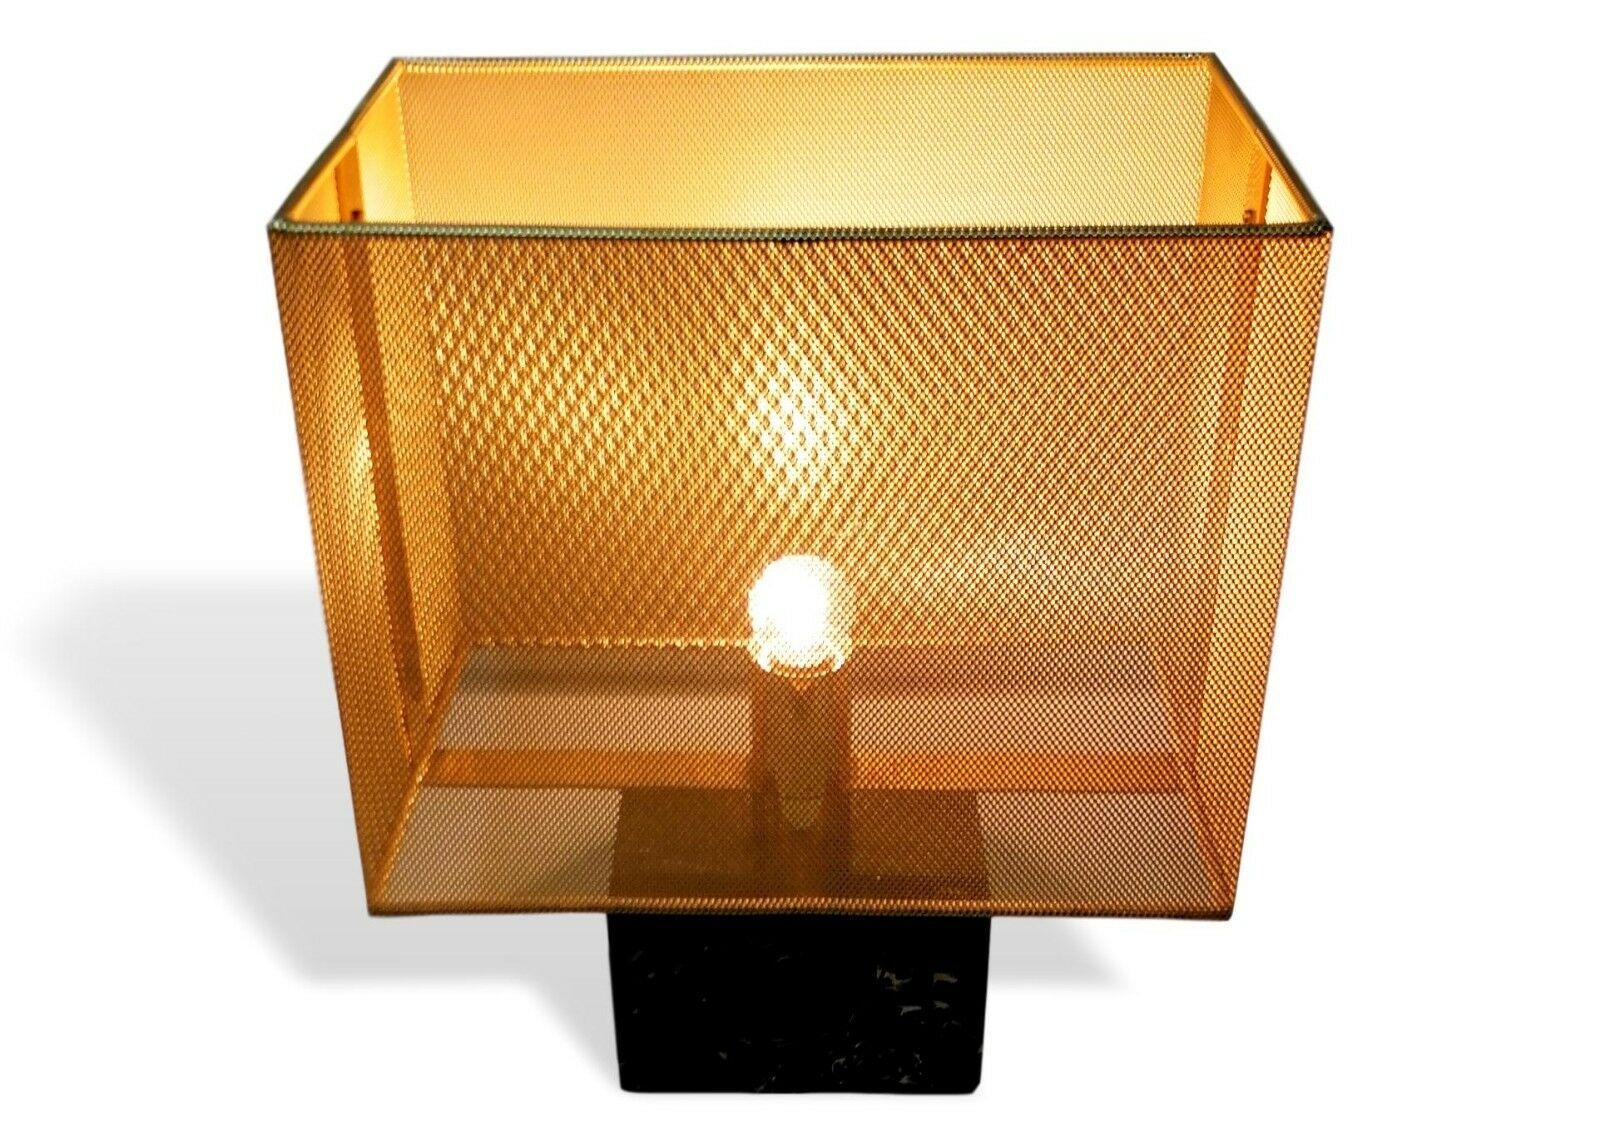 Italian Vintage Table Lamp in Marble and Metal Mesh, Lamperti Production, 1970s For Sale